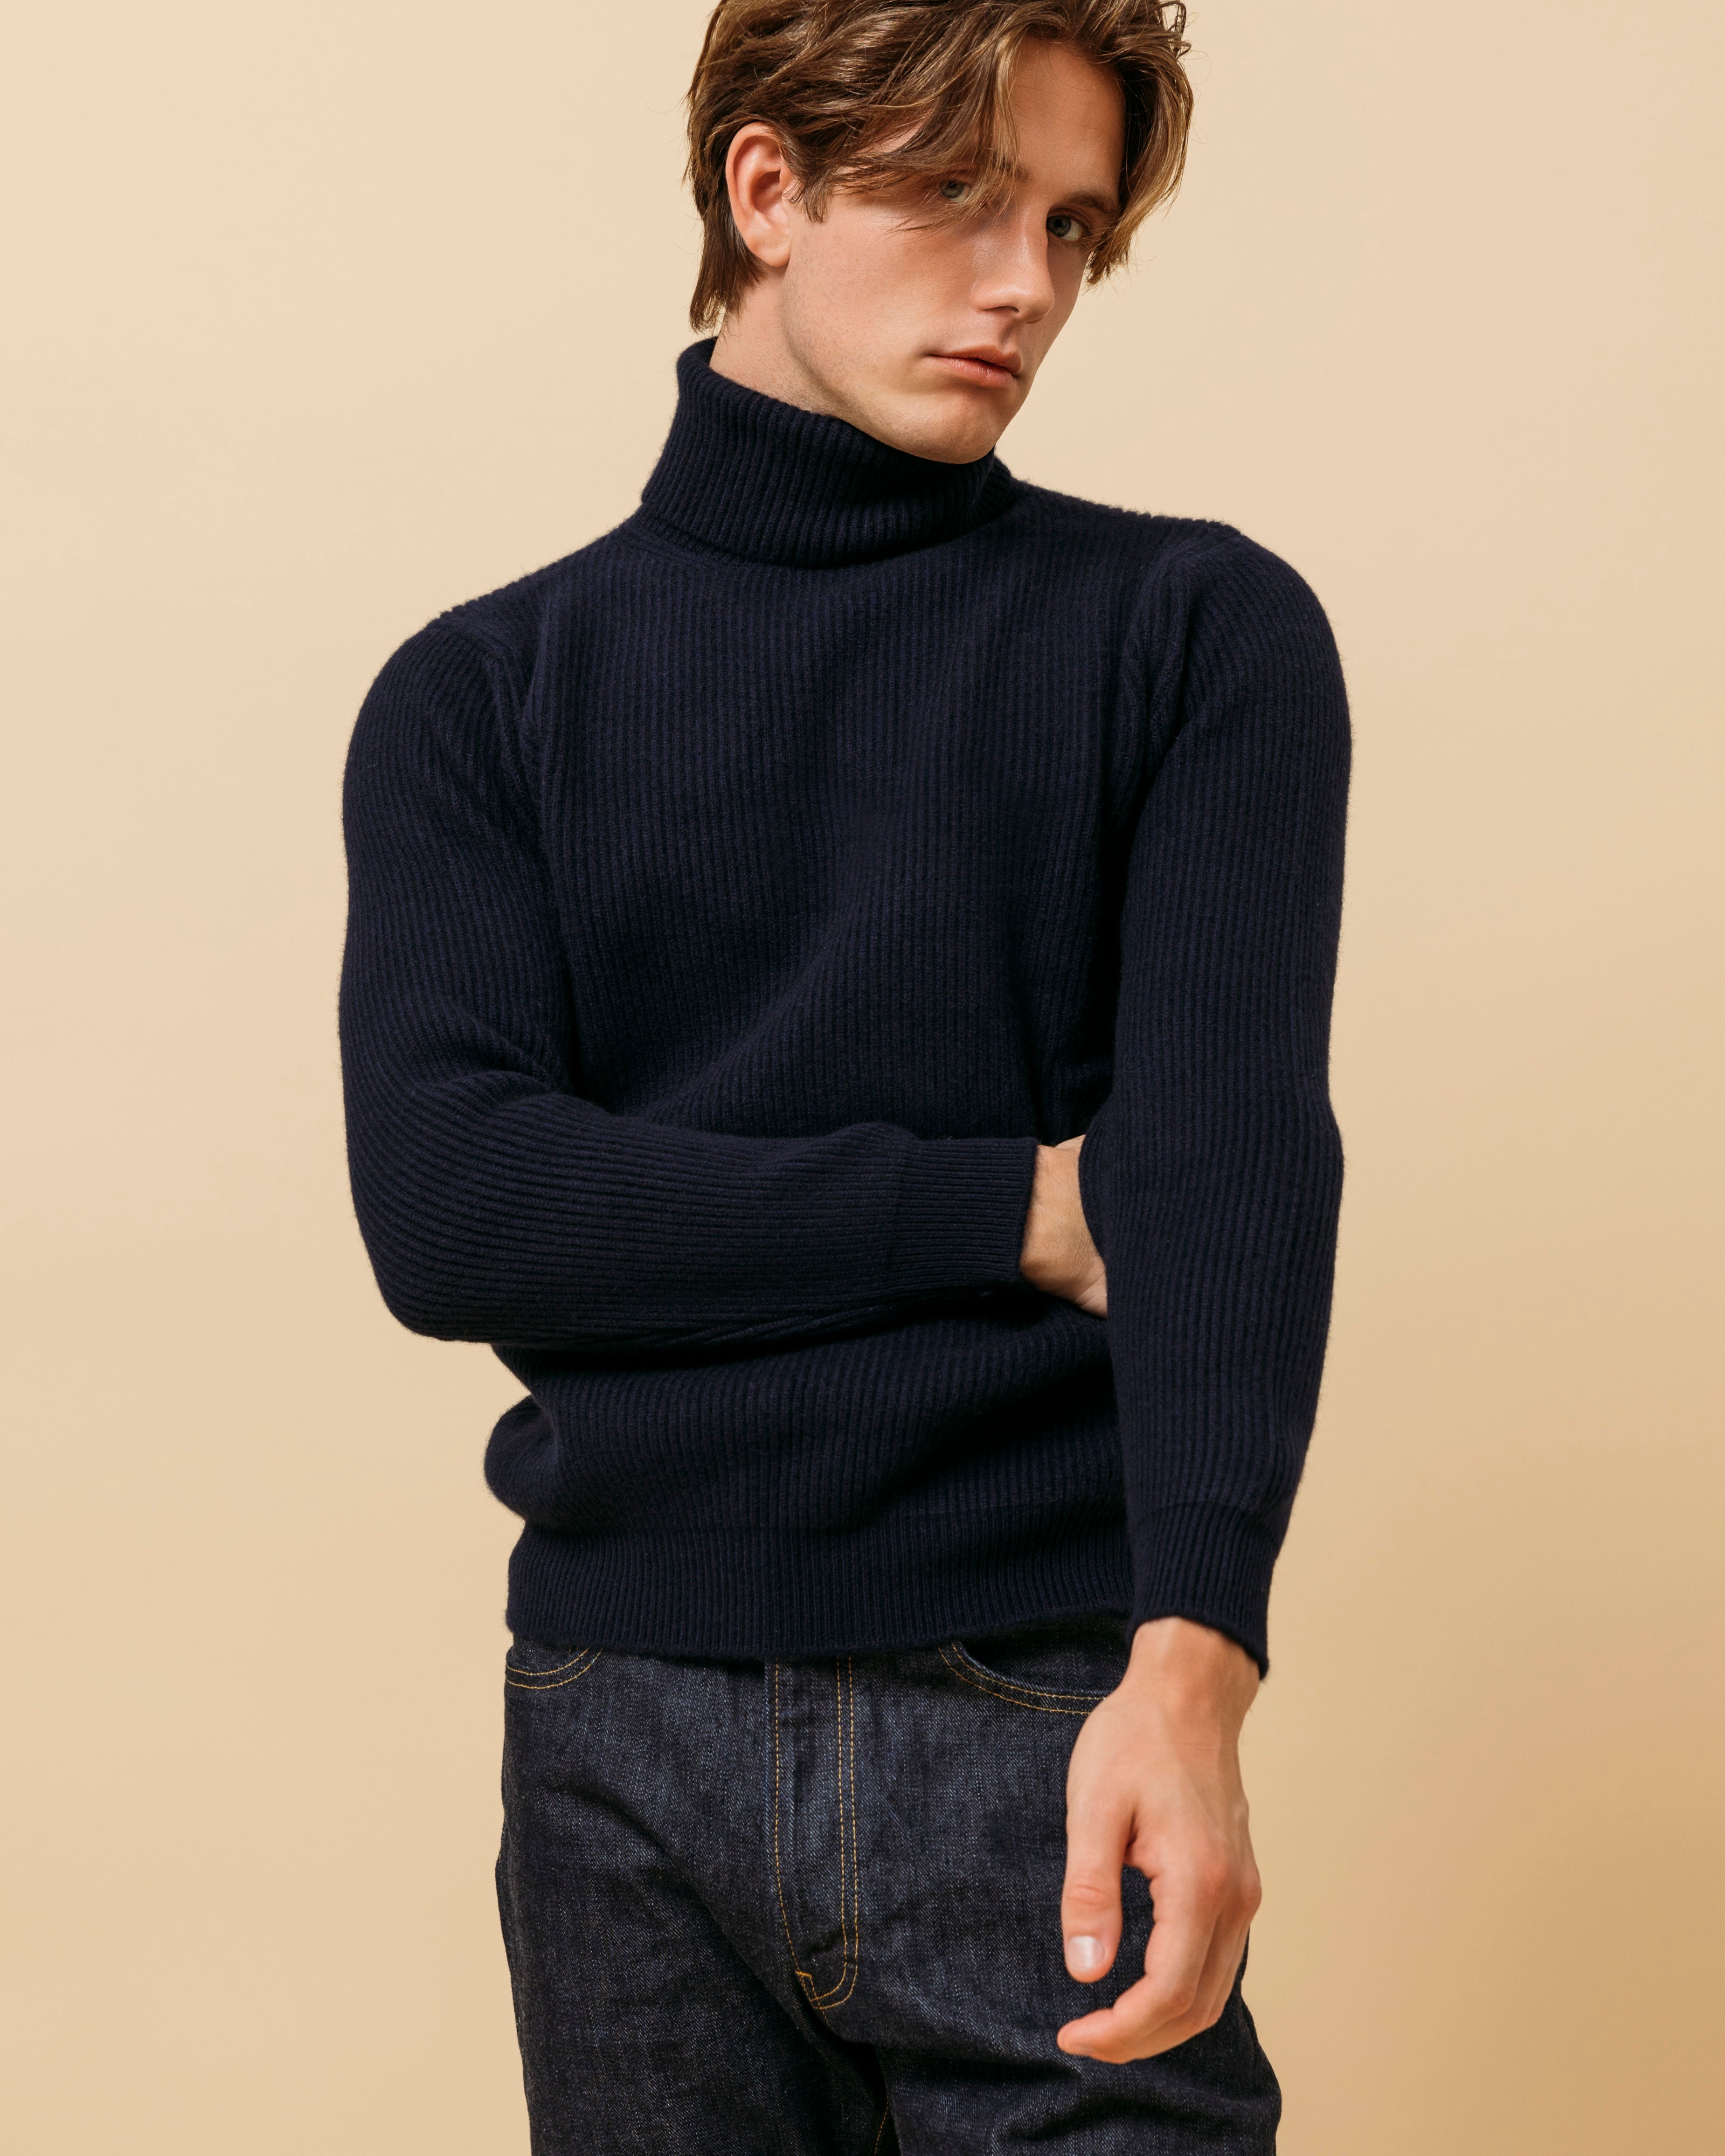 Cashmere ribbed submariner rollneck in navy